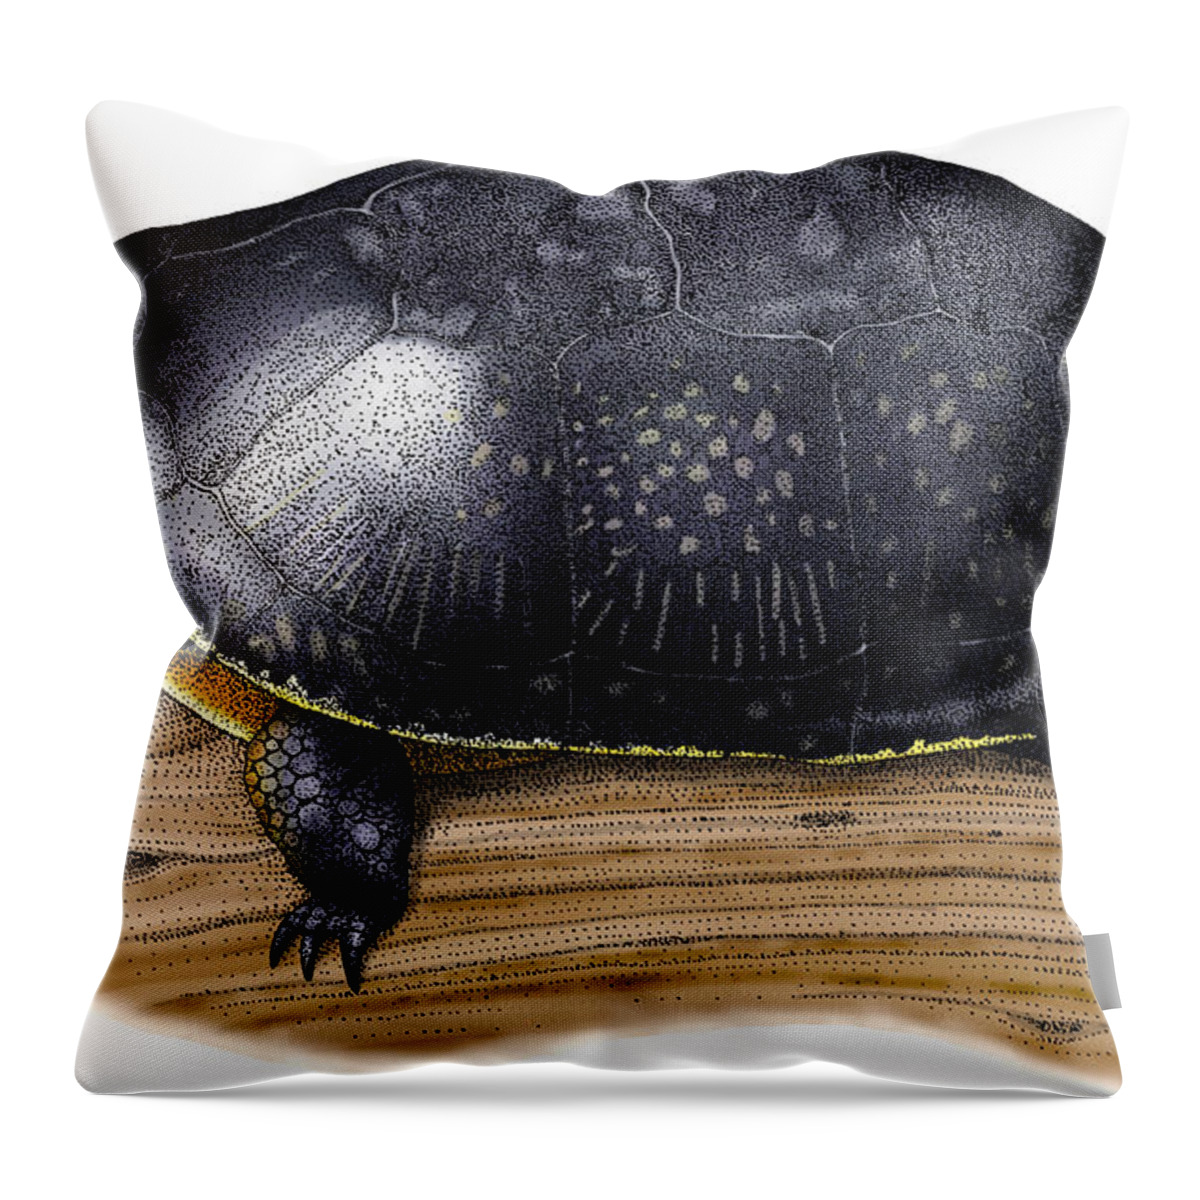 Art Throw Pillow featuring the photograph Blandings Turtle by Roger Hall